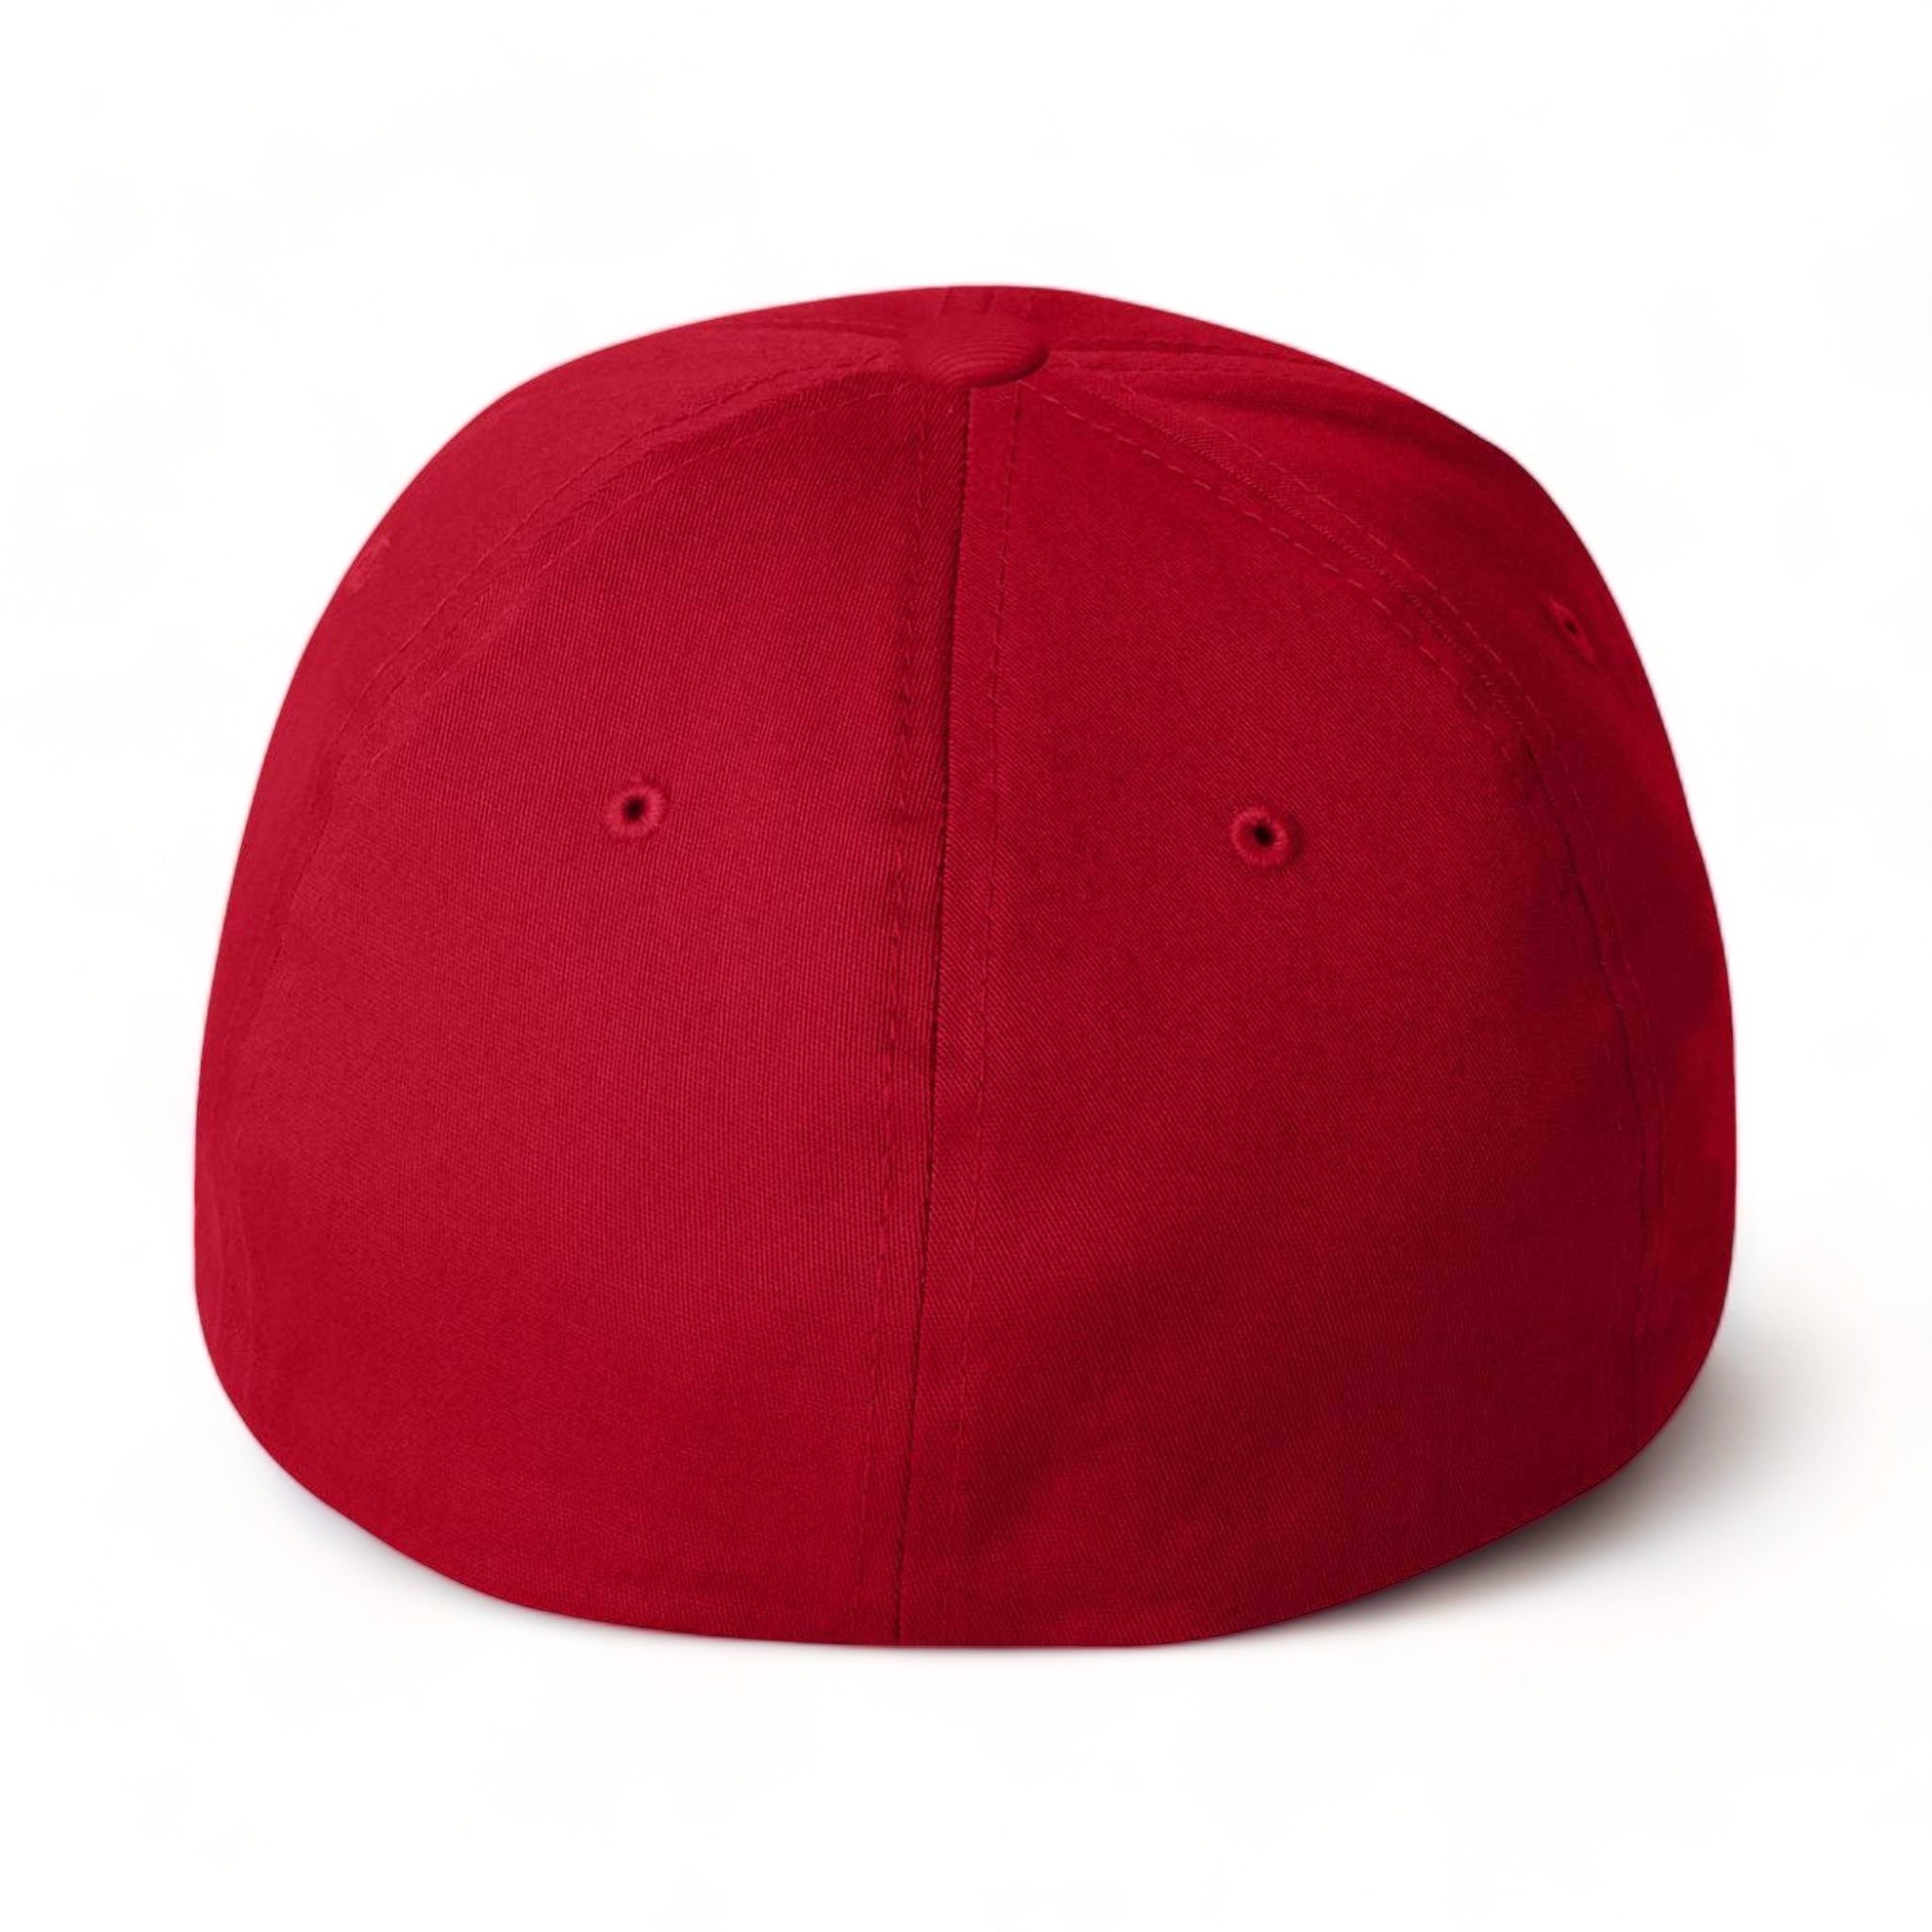 Back view of Flexfit 5001 custom hat in red